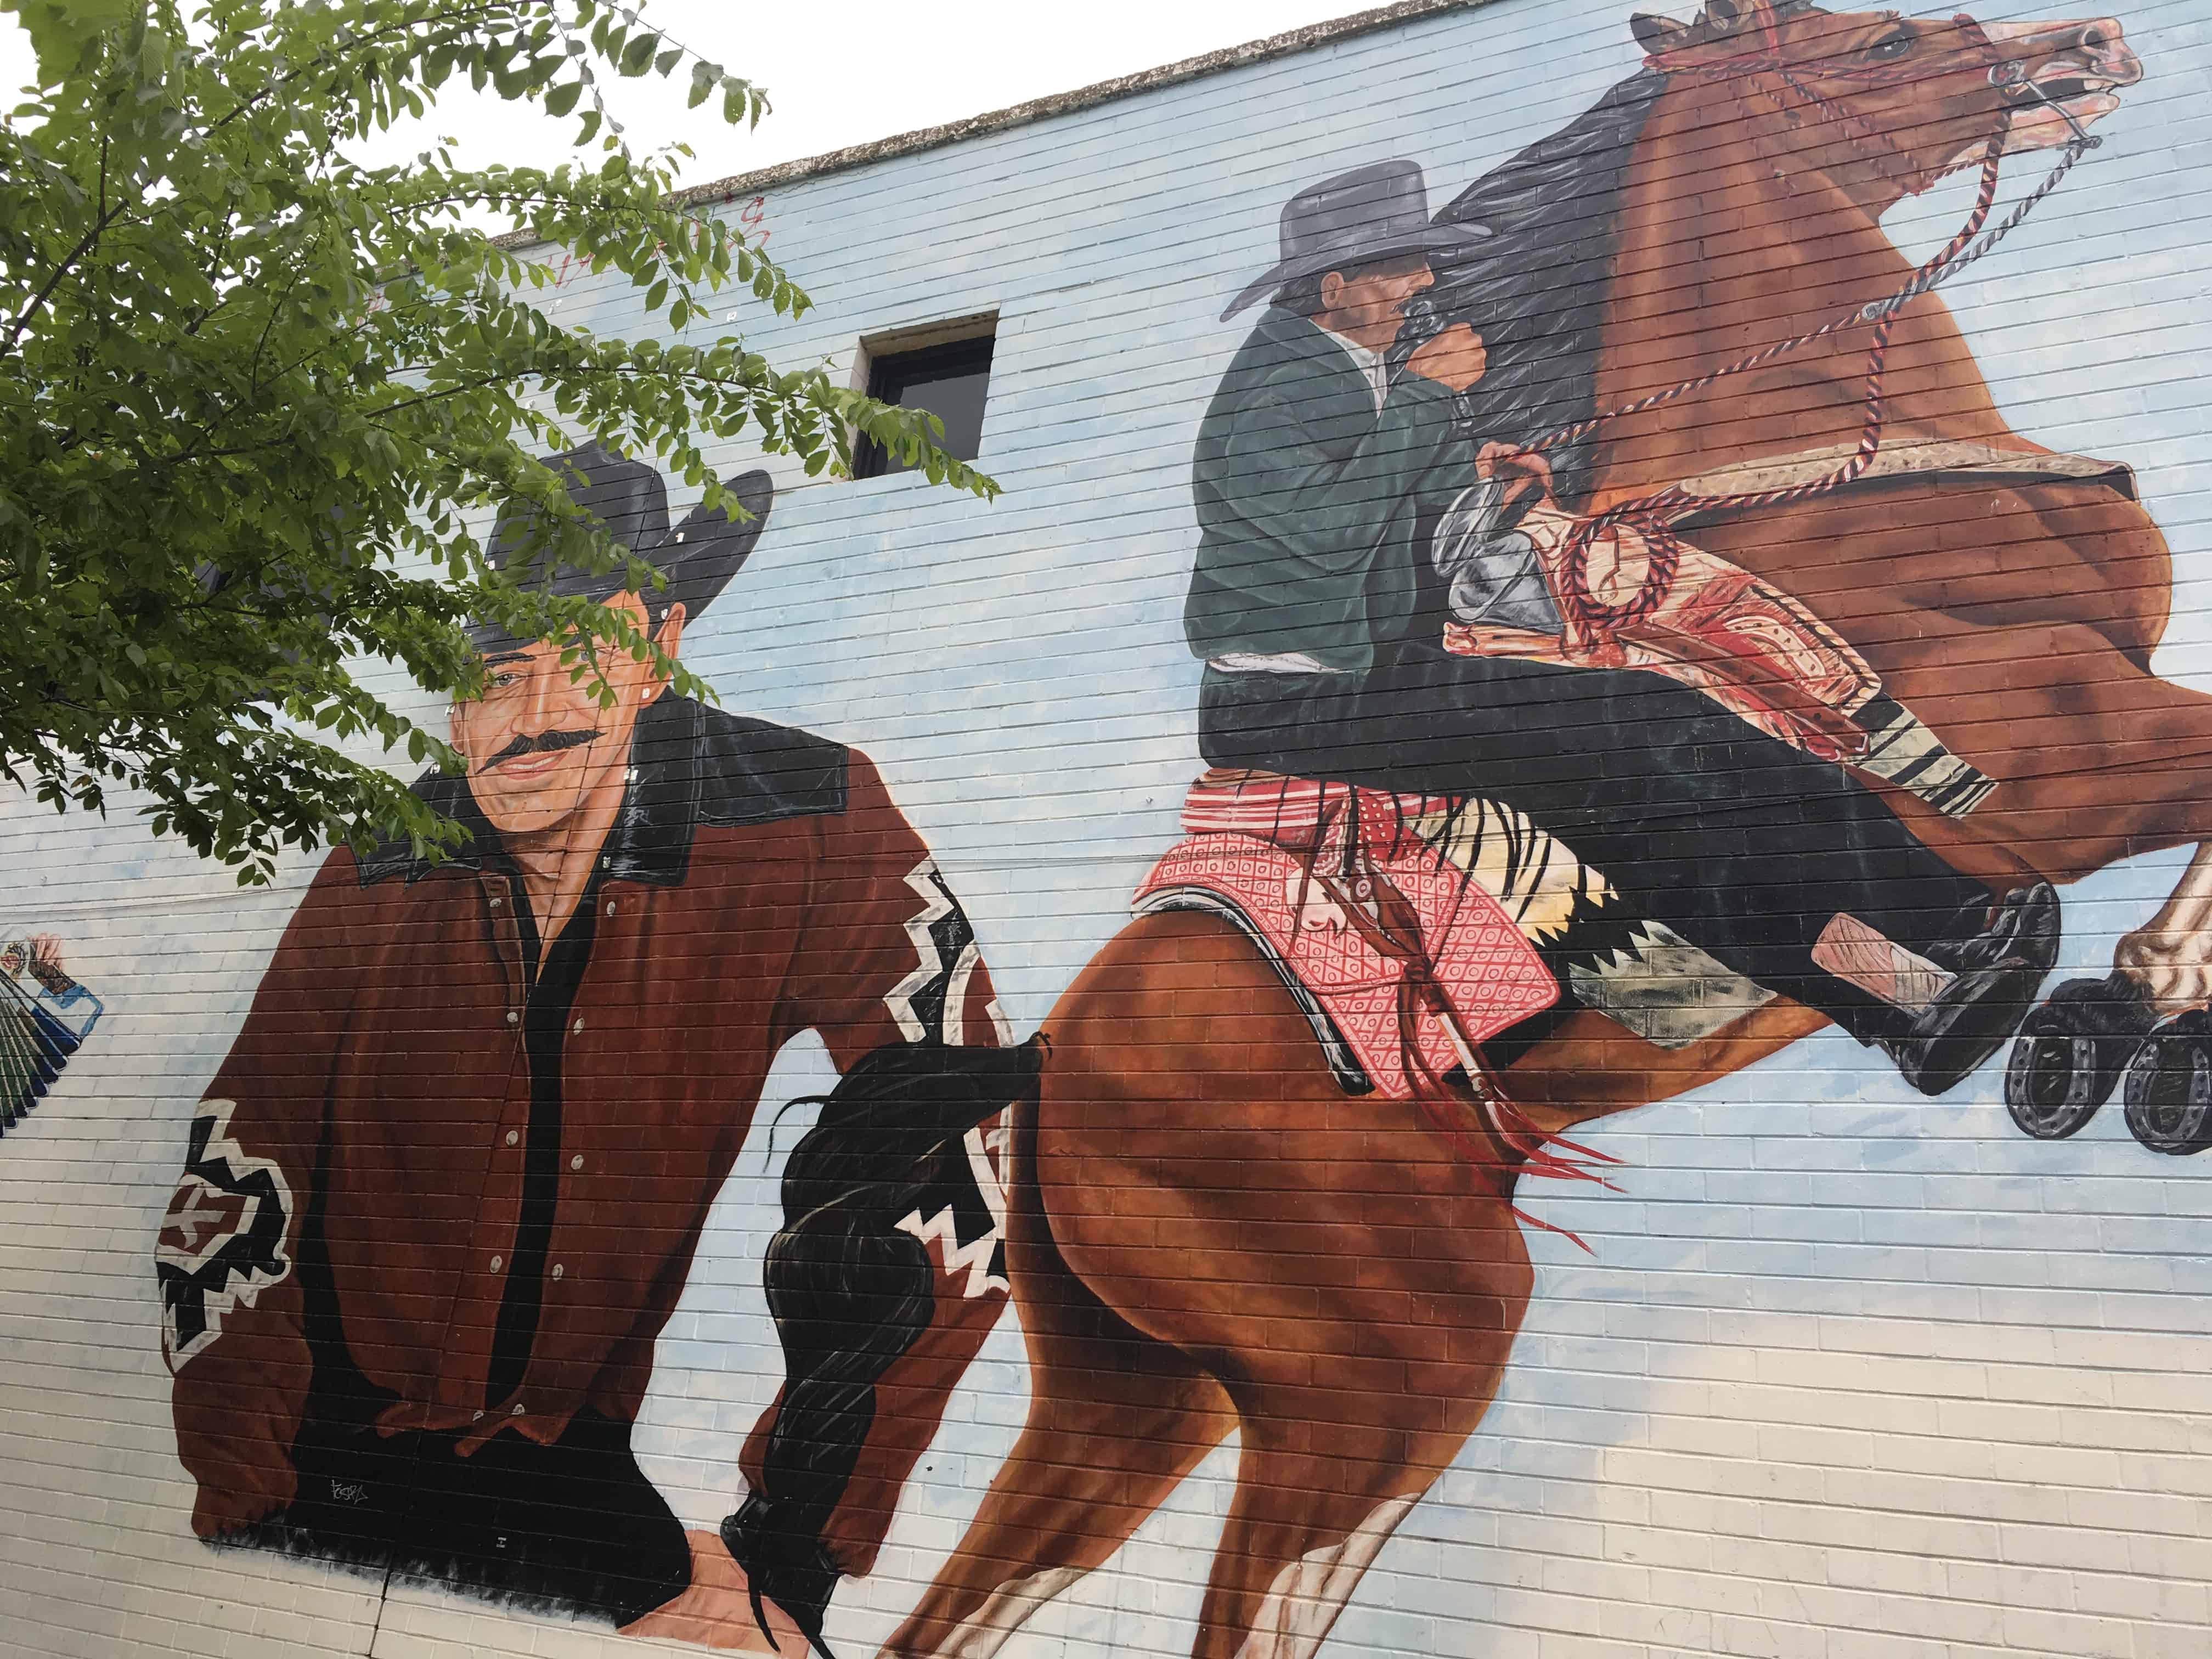 Cowboy mural at 18th and Wood in Pilsen, Chicago, Illinois